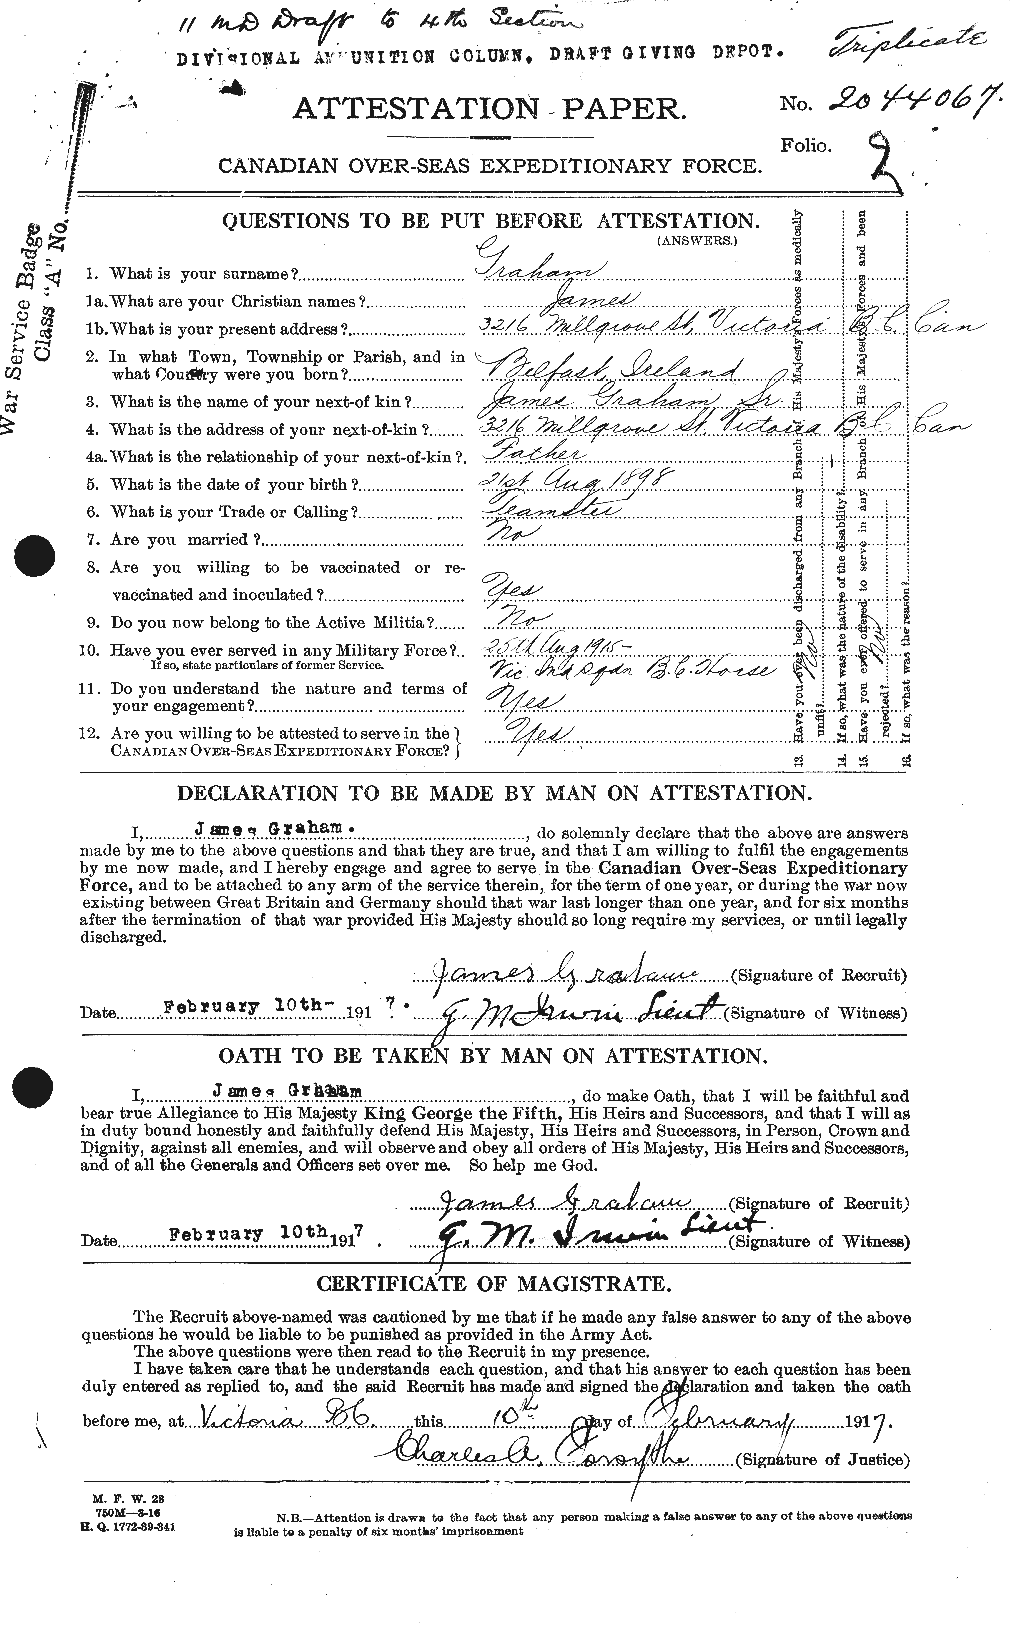 Personnel Records of the First World War - CEF 357794a